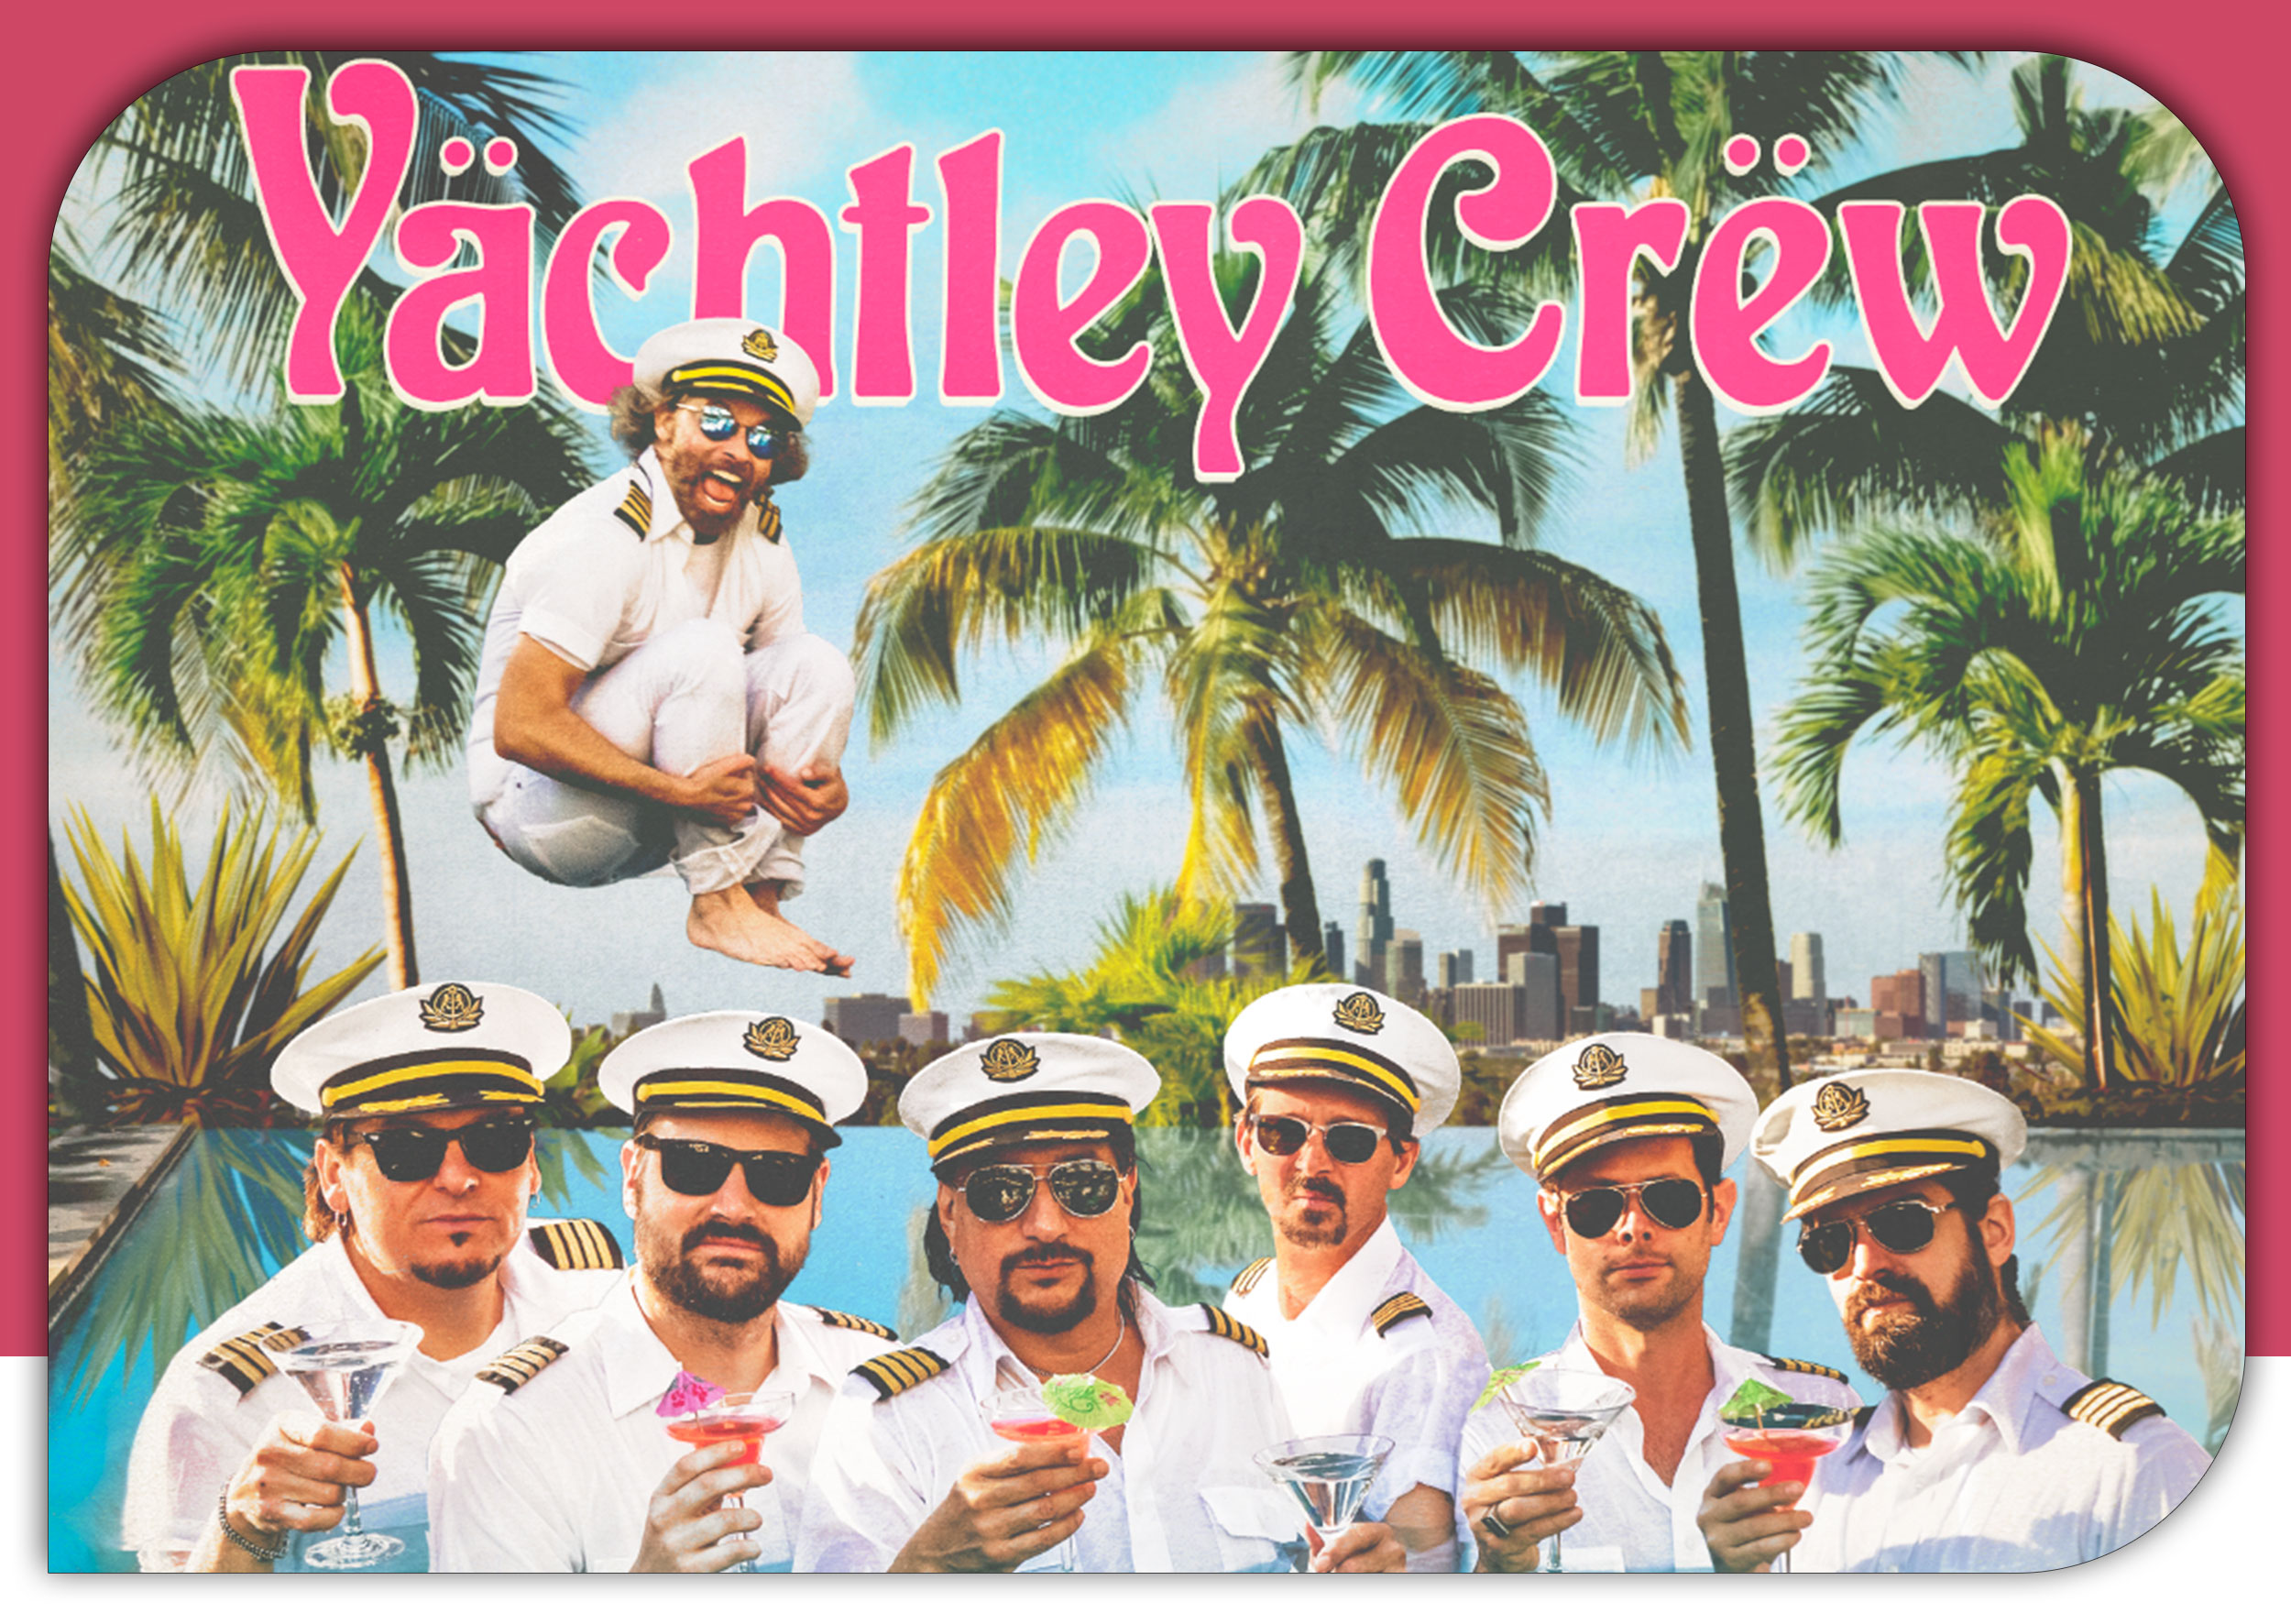 Yachtley Crew band picture with pool and palm trees